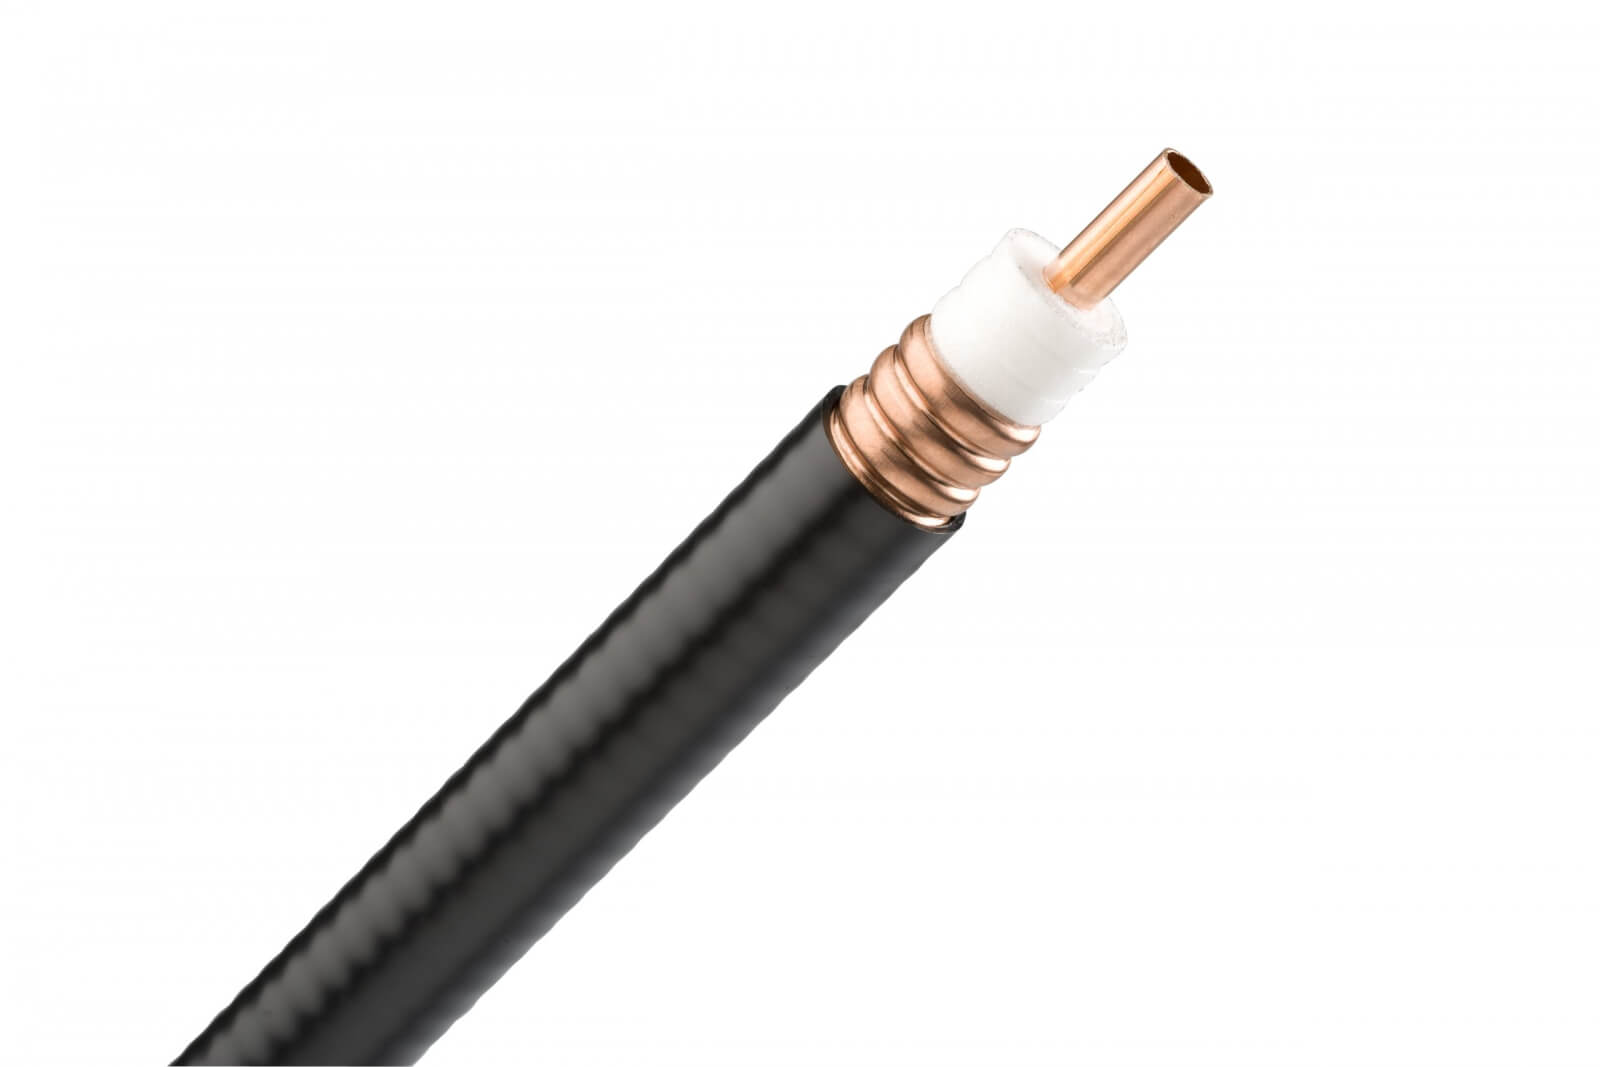 Original Image: CommScope – AVA5RK-50, HELIAX® Andrew Virtual Air™ Coaxial Cable, corrugated copper, 7/8 in, black non-halogenated, fire retardant polyolefin jacket B2ca- s1a, d2,a1 (CPR testing is conducted annually please reference the website for latest classification)